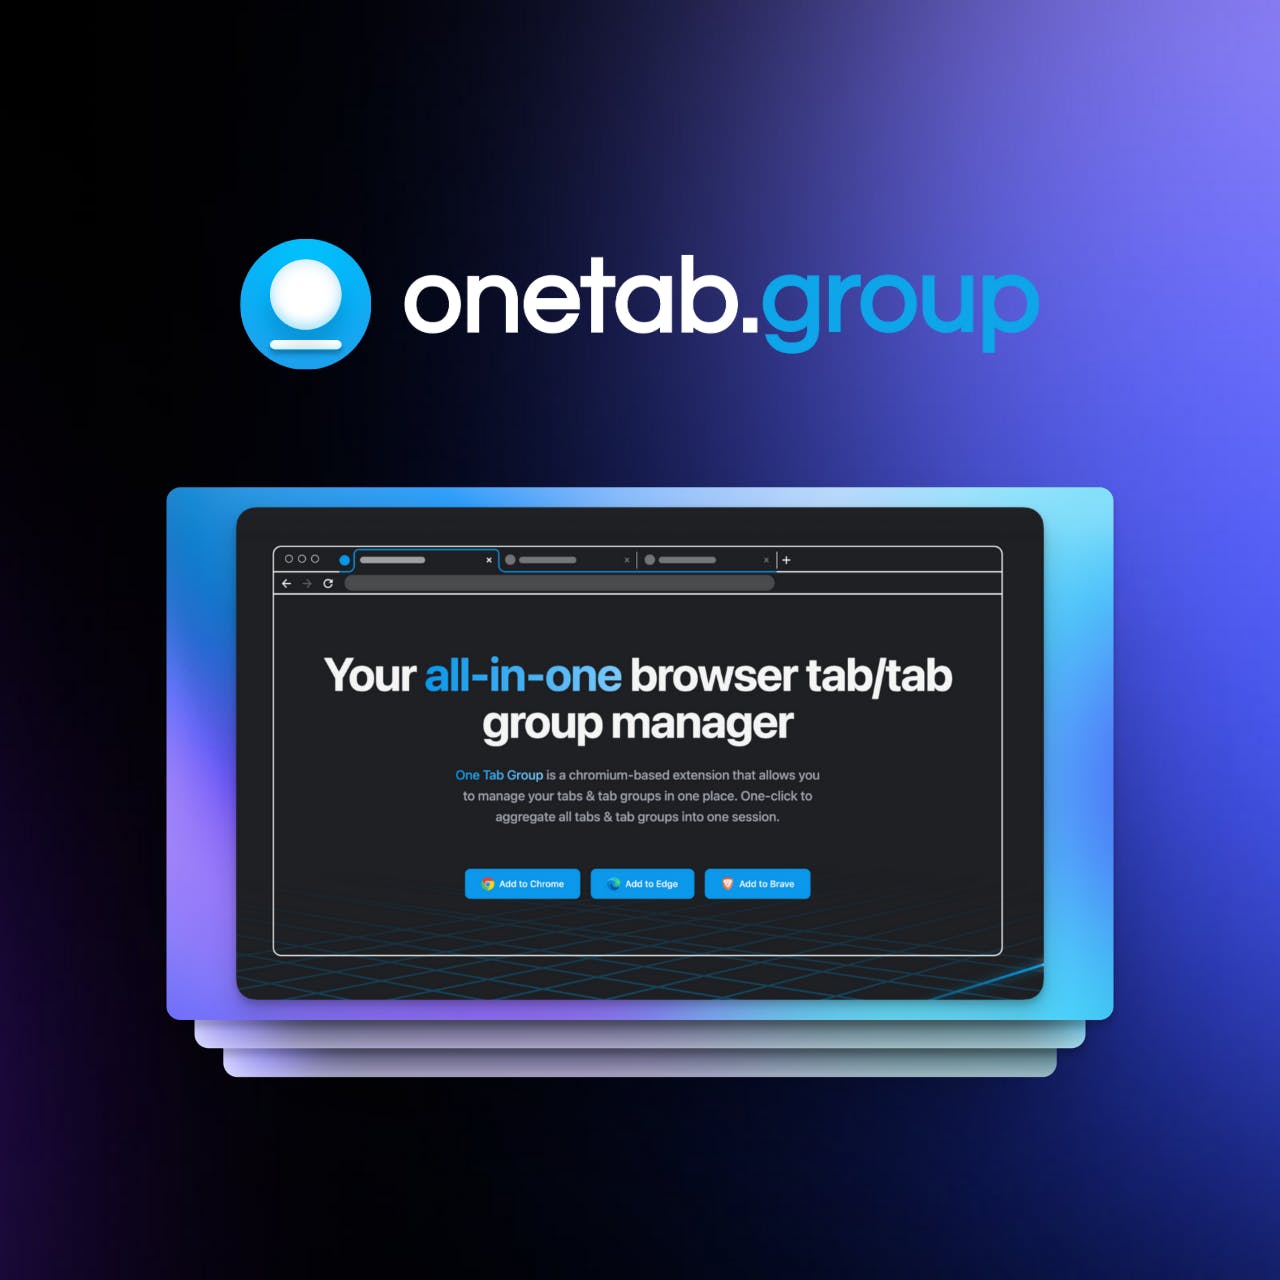 One Tab Group  How to migrate from OneTab to One Tab Group?